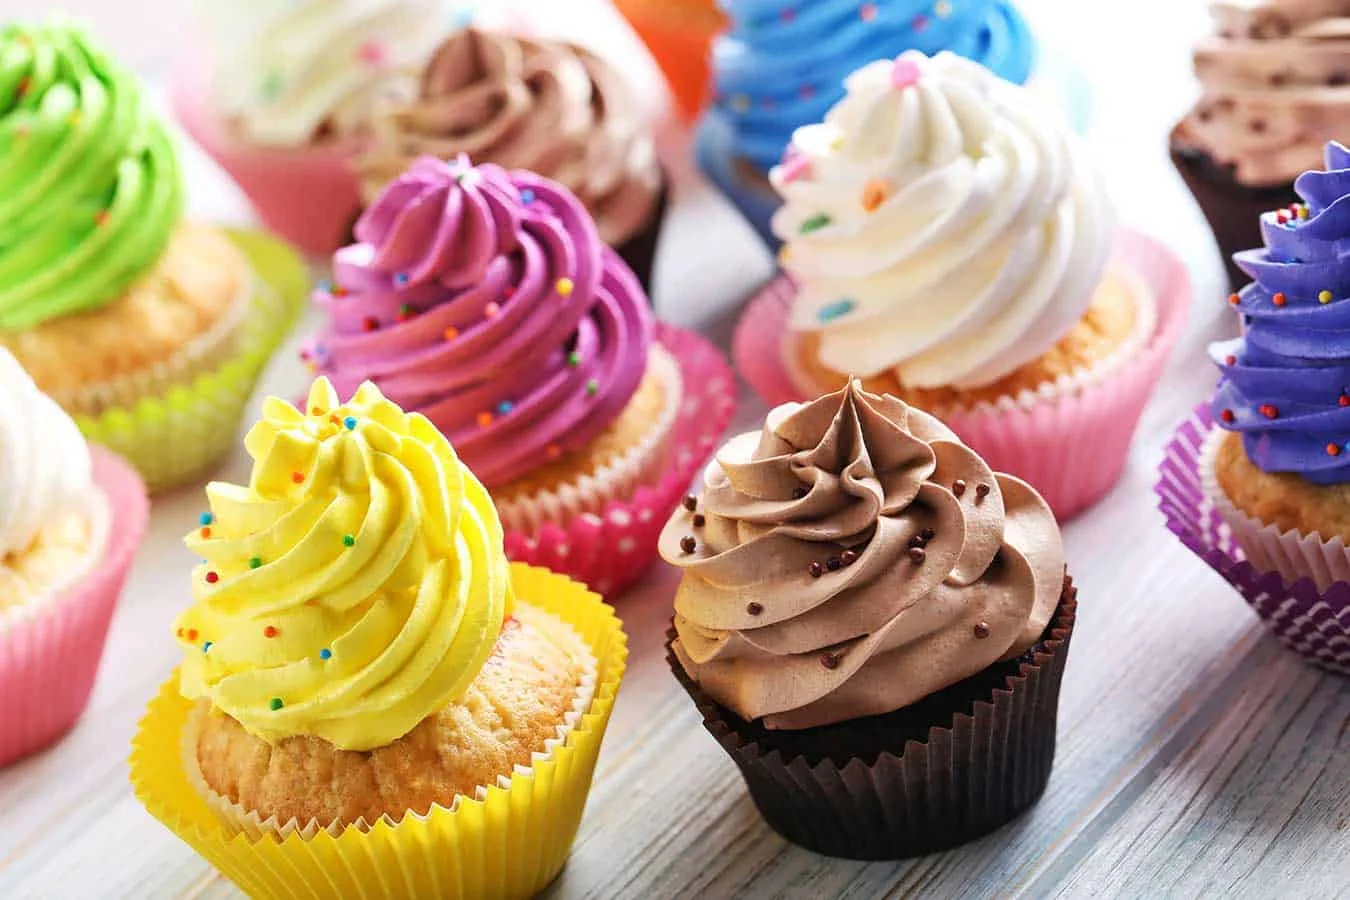 4 types of cake frosting you must try